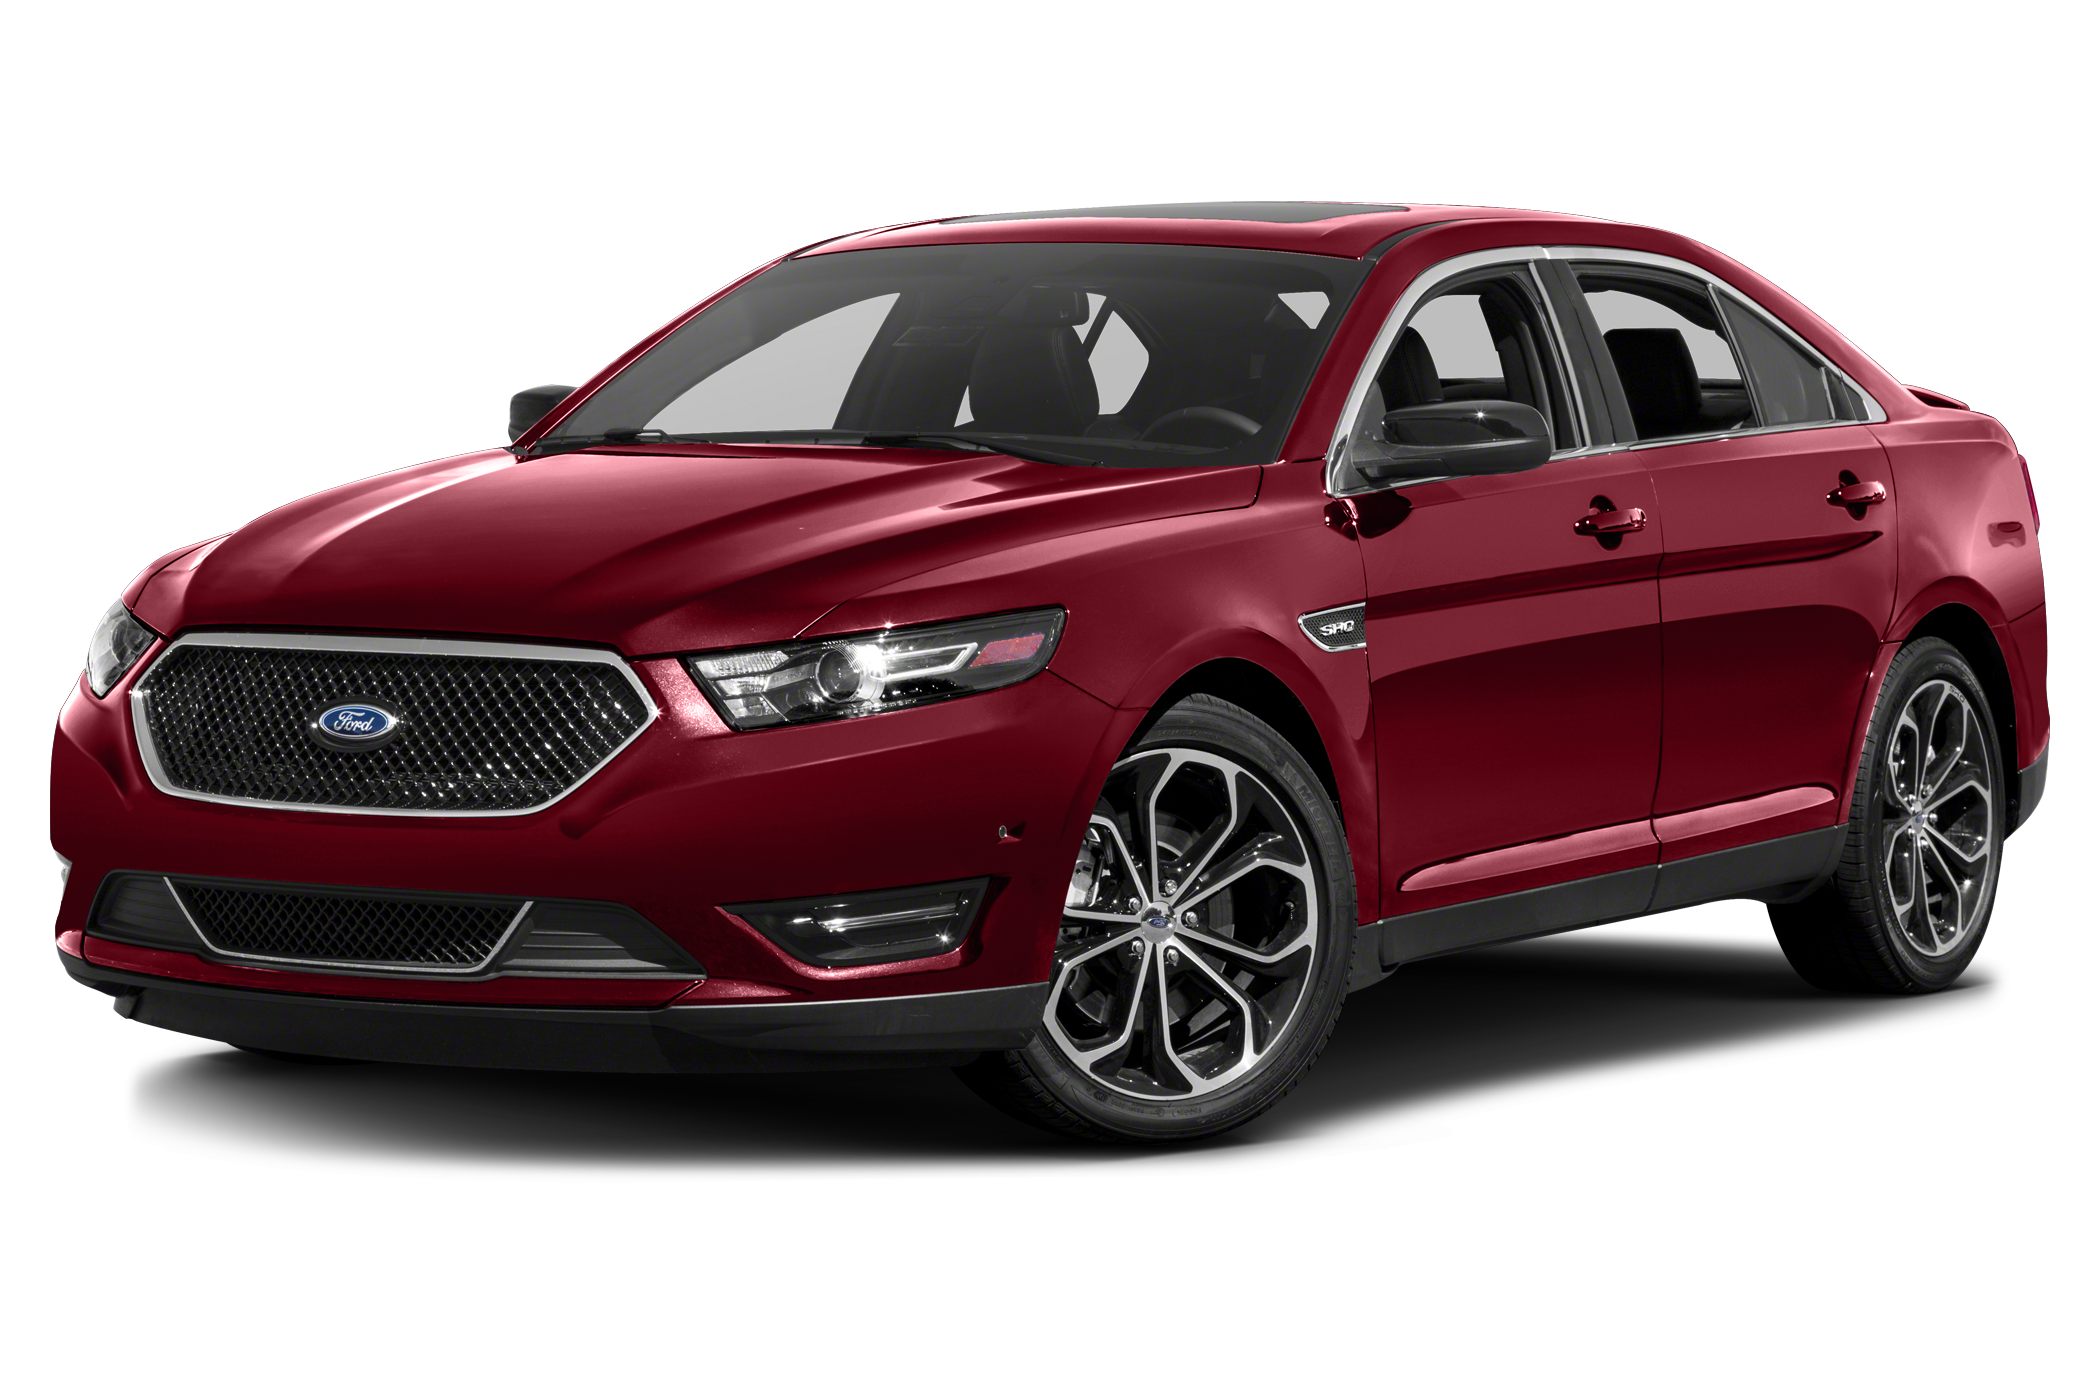 Great Deals on a new 2015 Ford Taurus SHO 4dr All-wheel Drive Sedan at